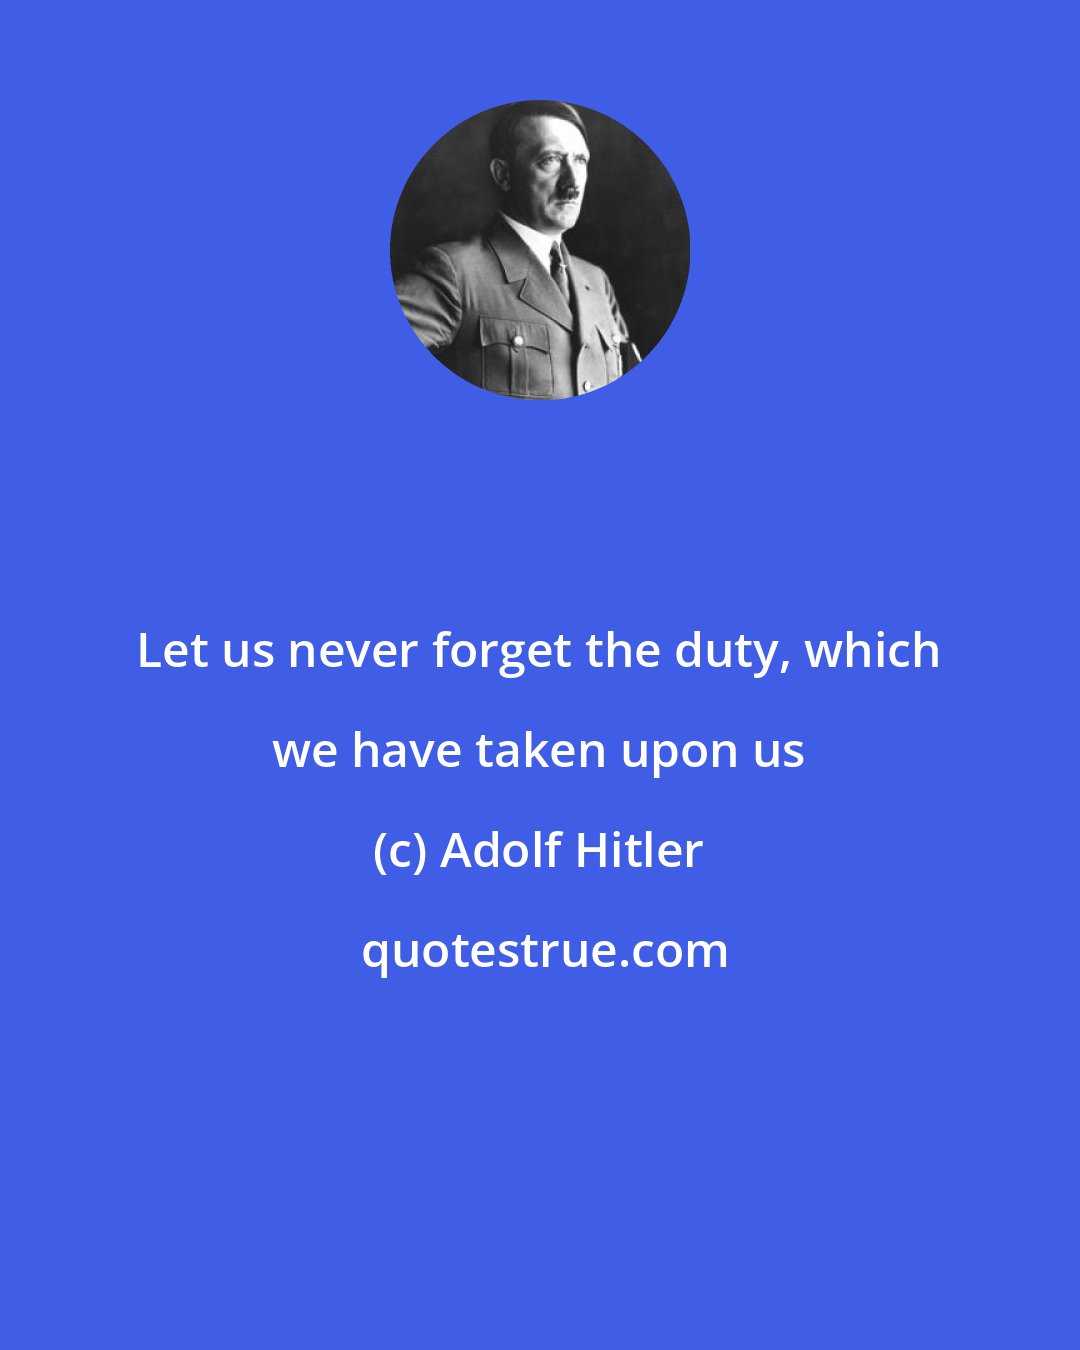 Adolf Hitler: Let us never forget the duty, which we have taken upon us